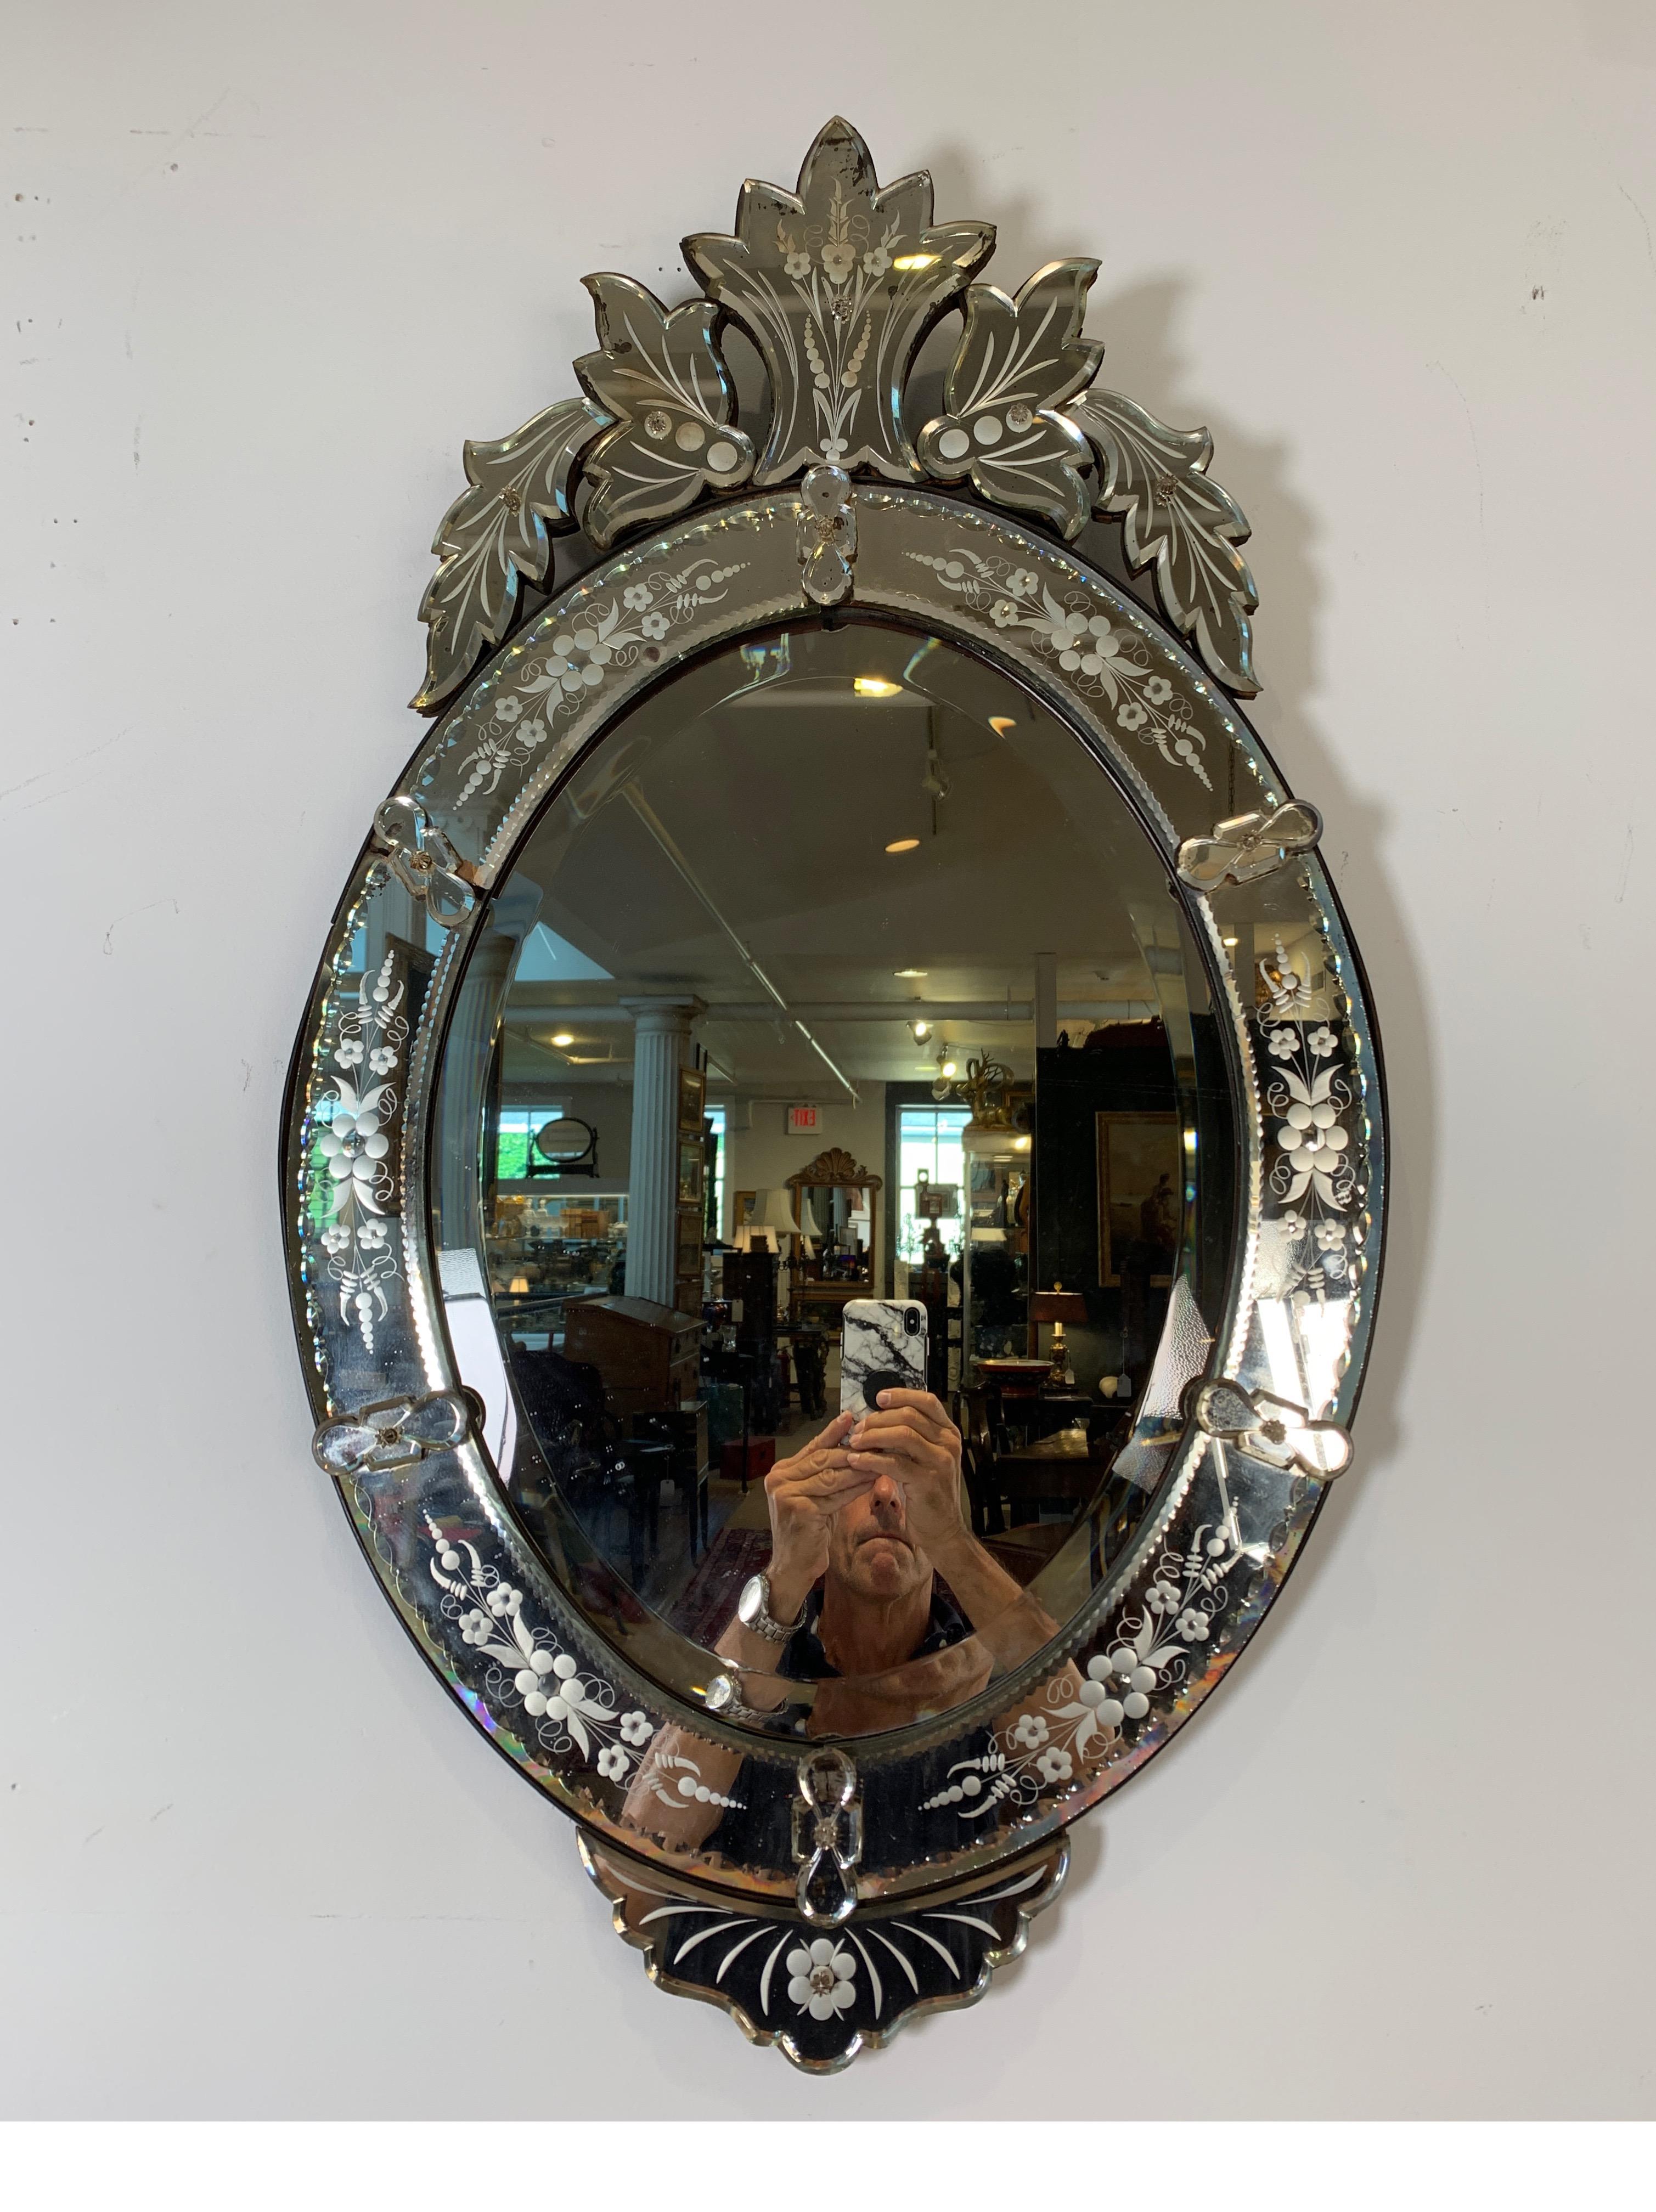 Venetian etched mirror with original wood backing, circa early 1900s
In good original condition.
Dimensions: 21.5